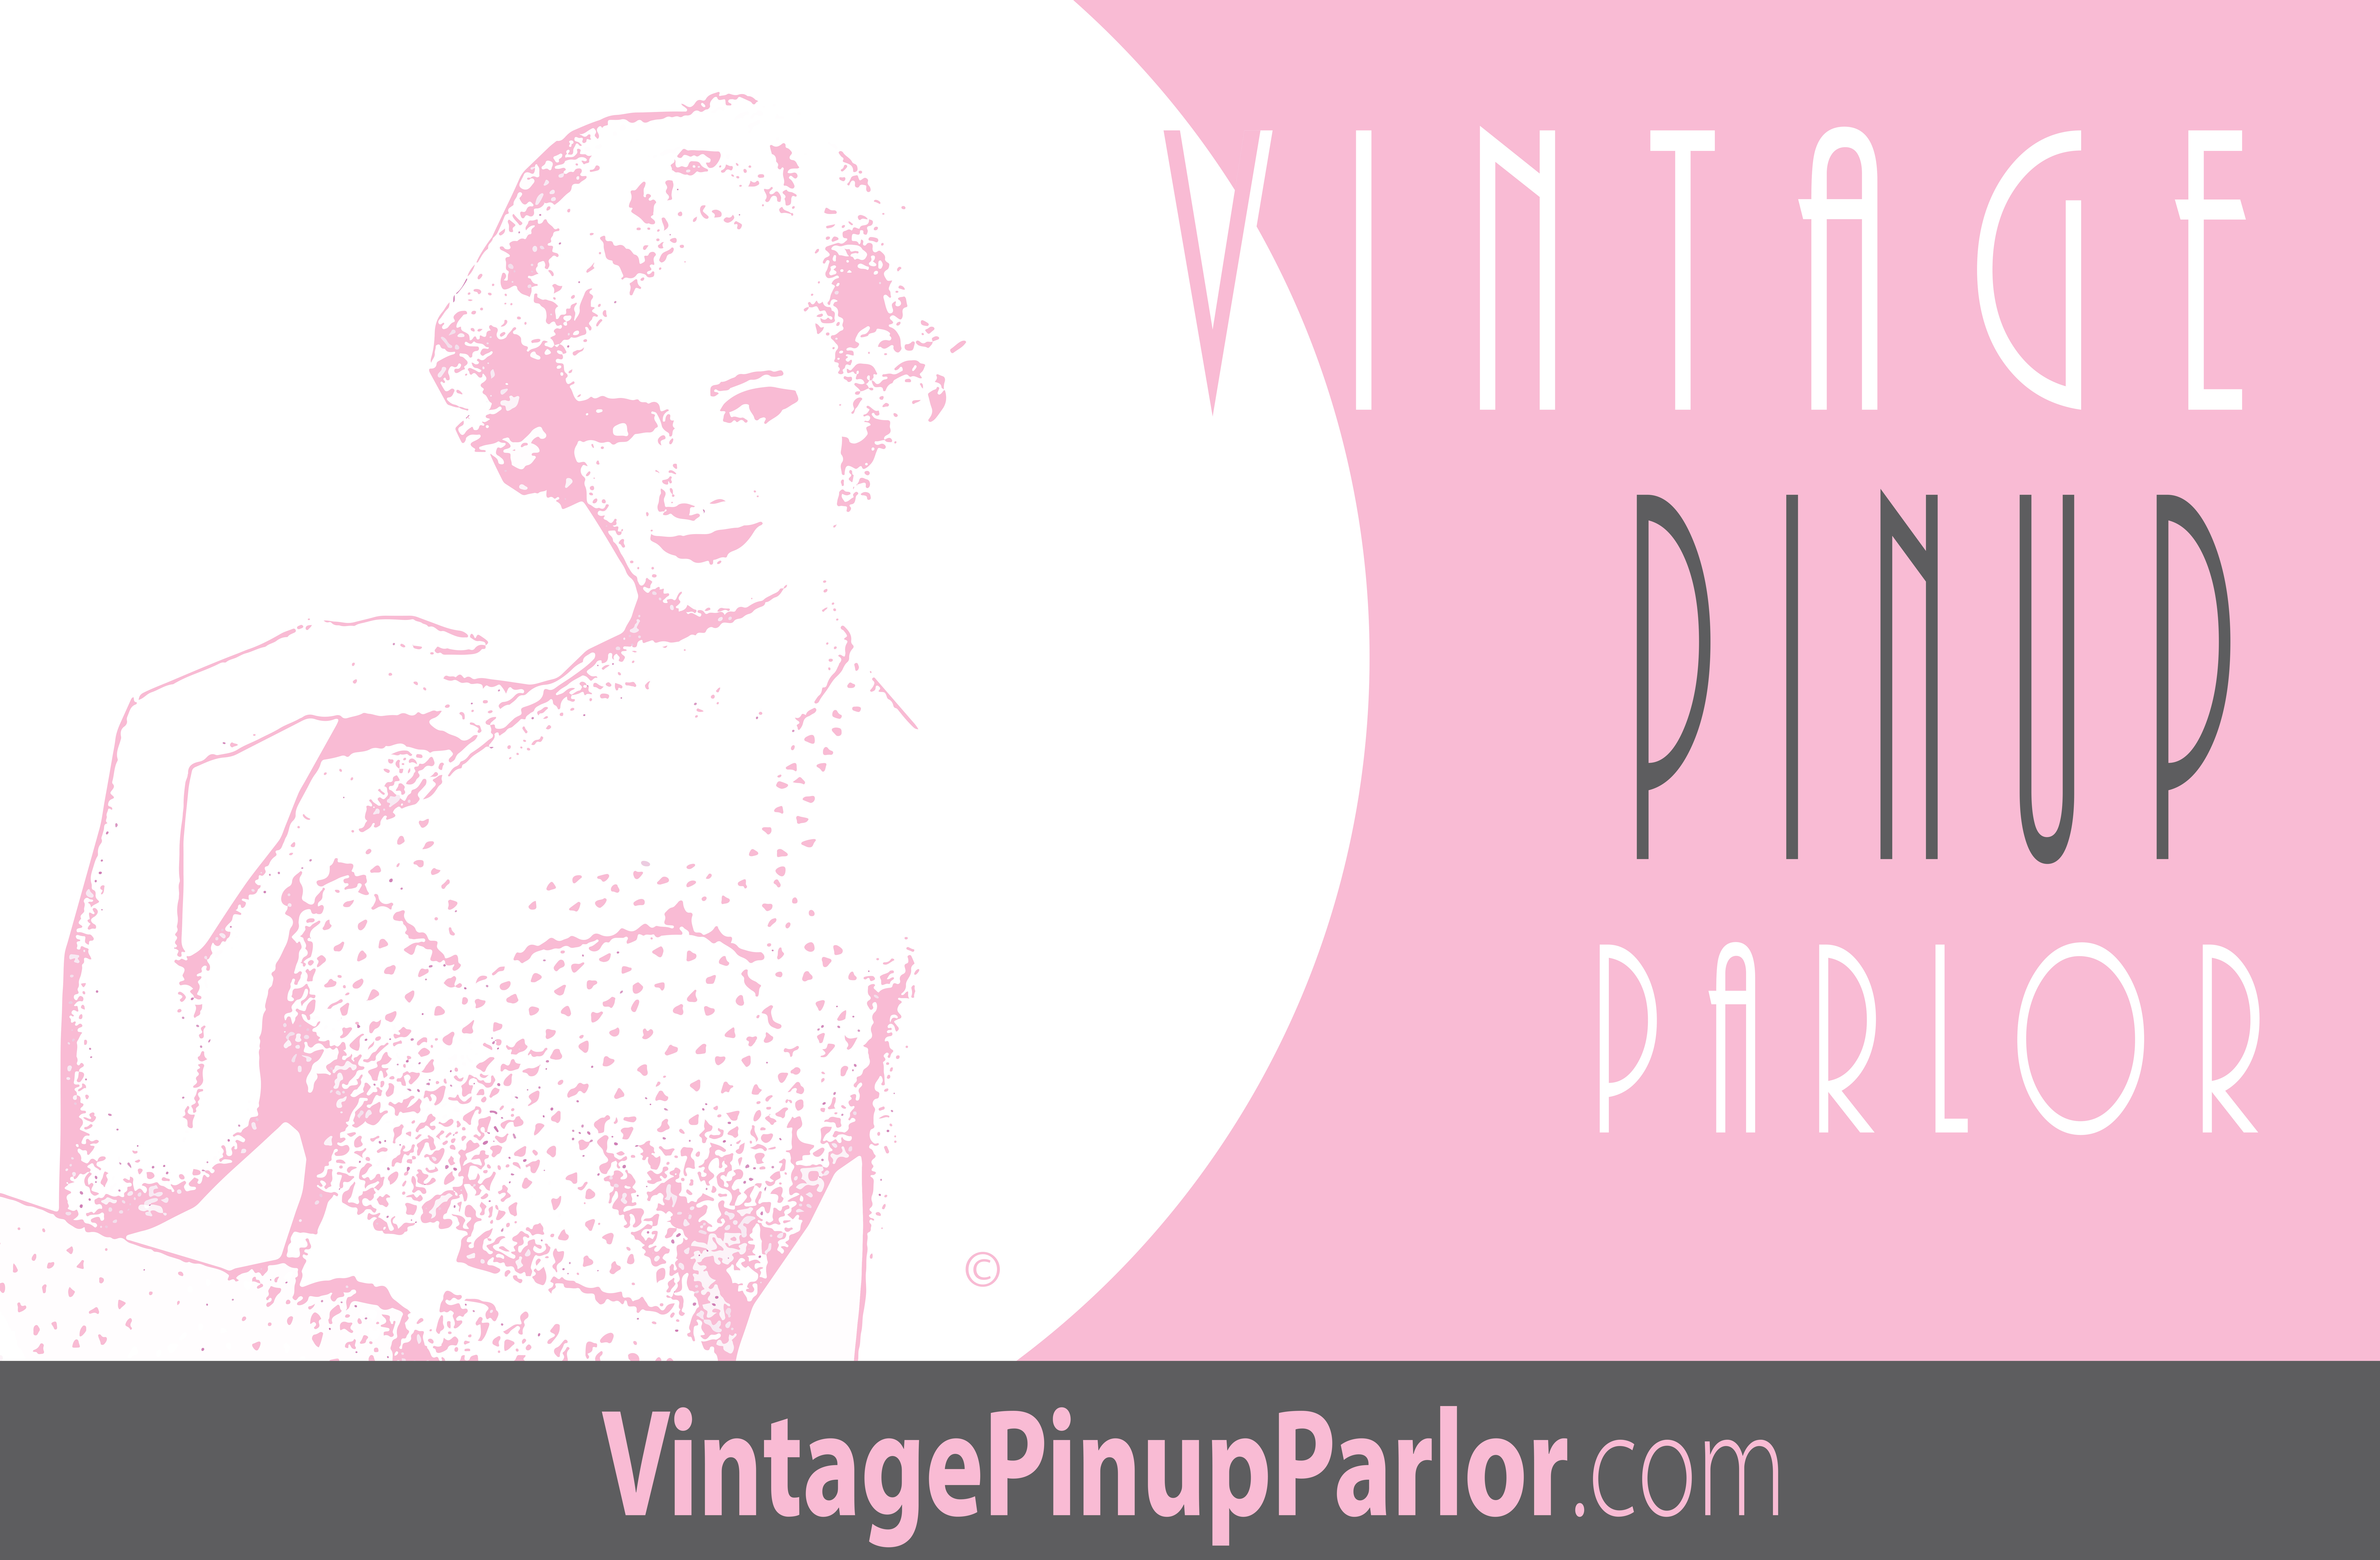 The Vintage Pin-up Parlor